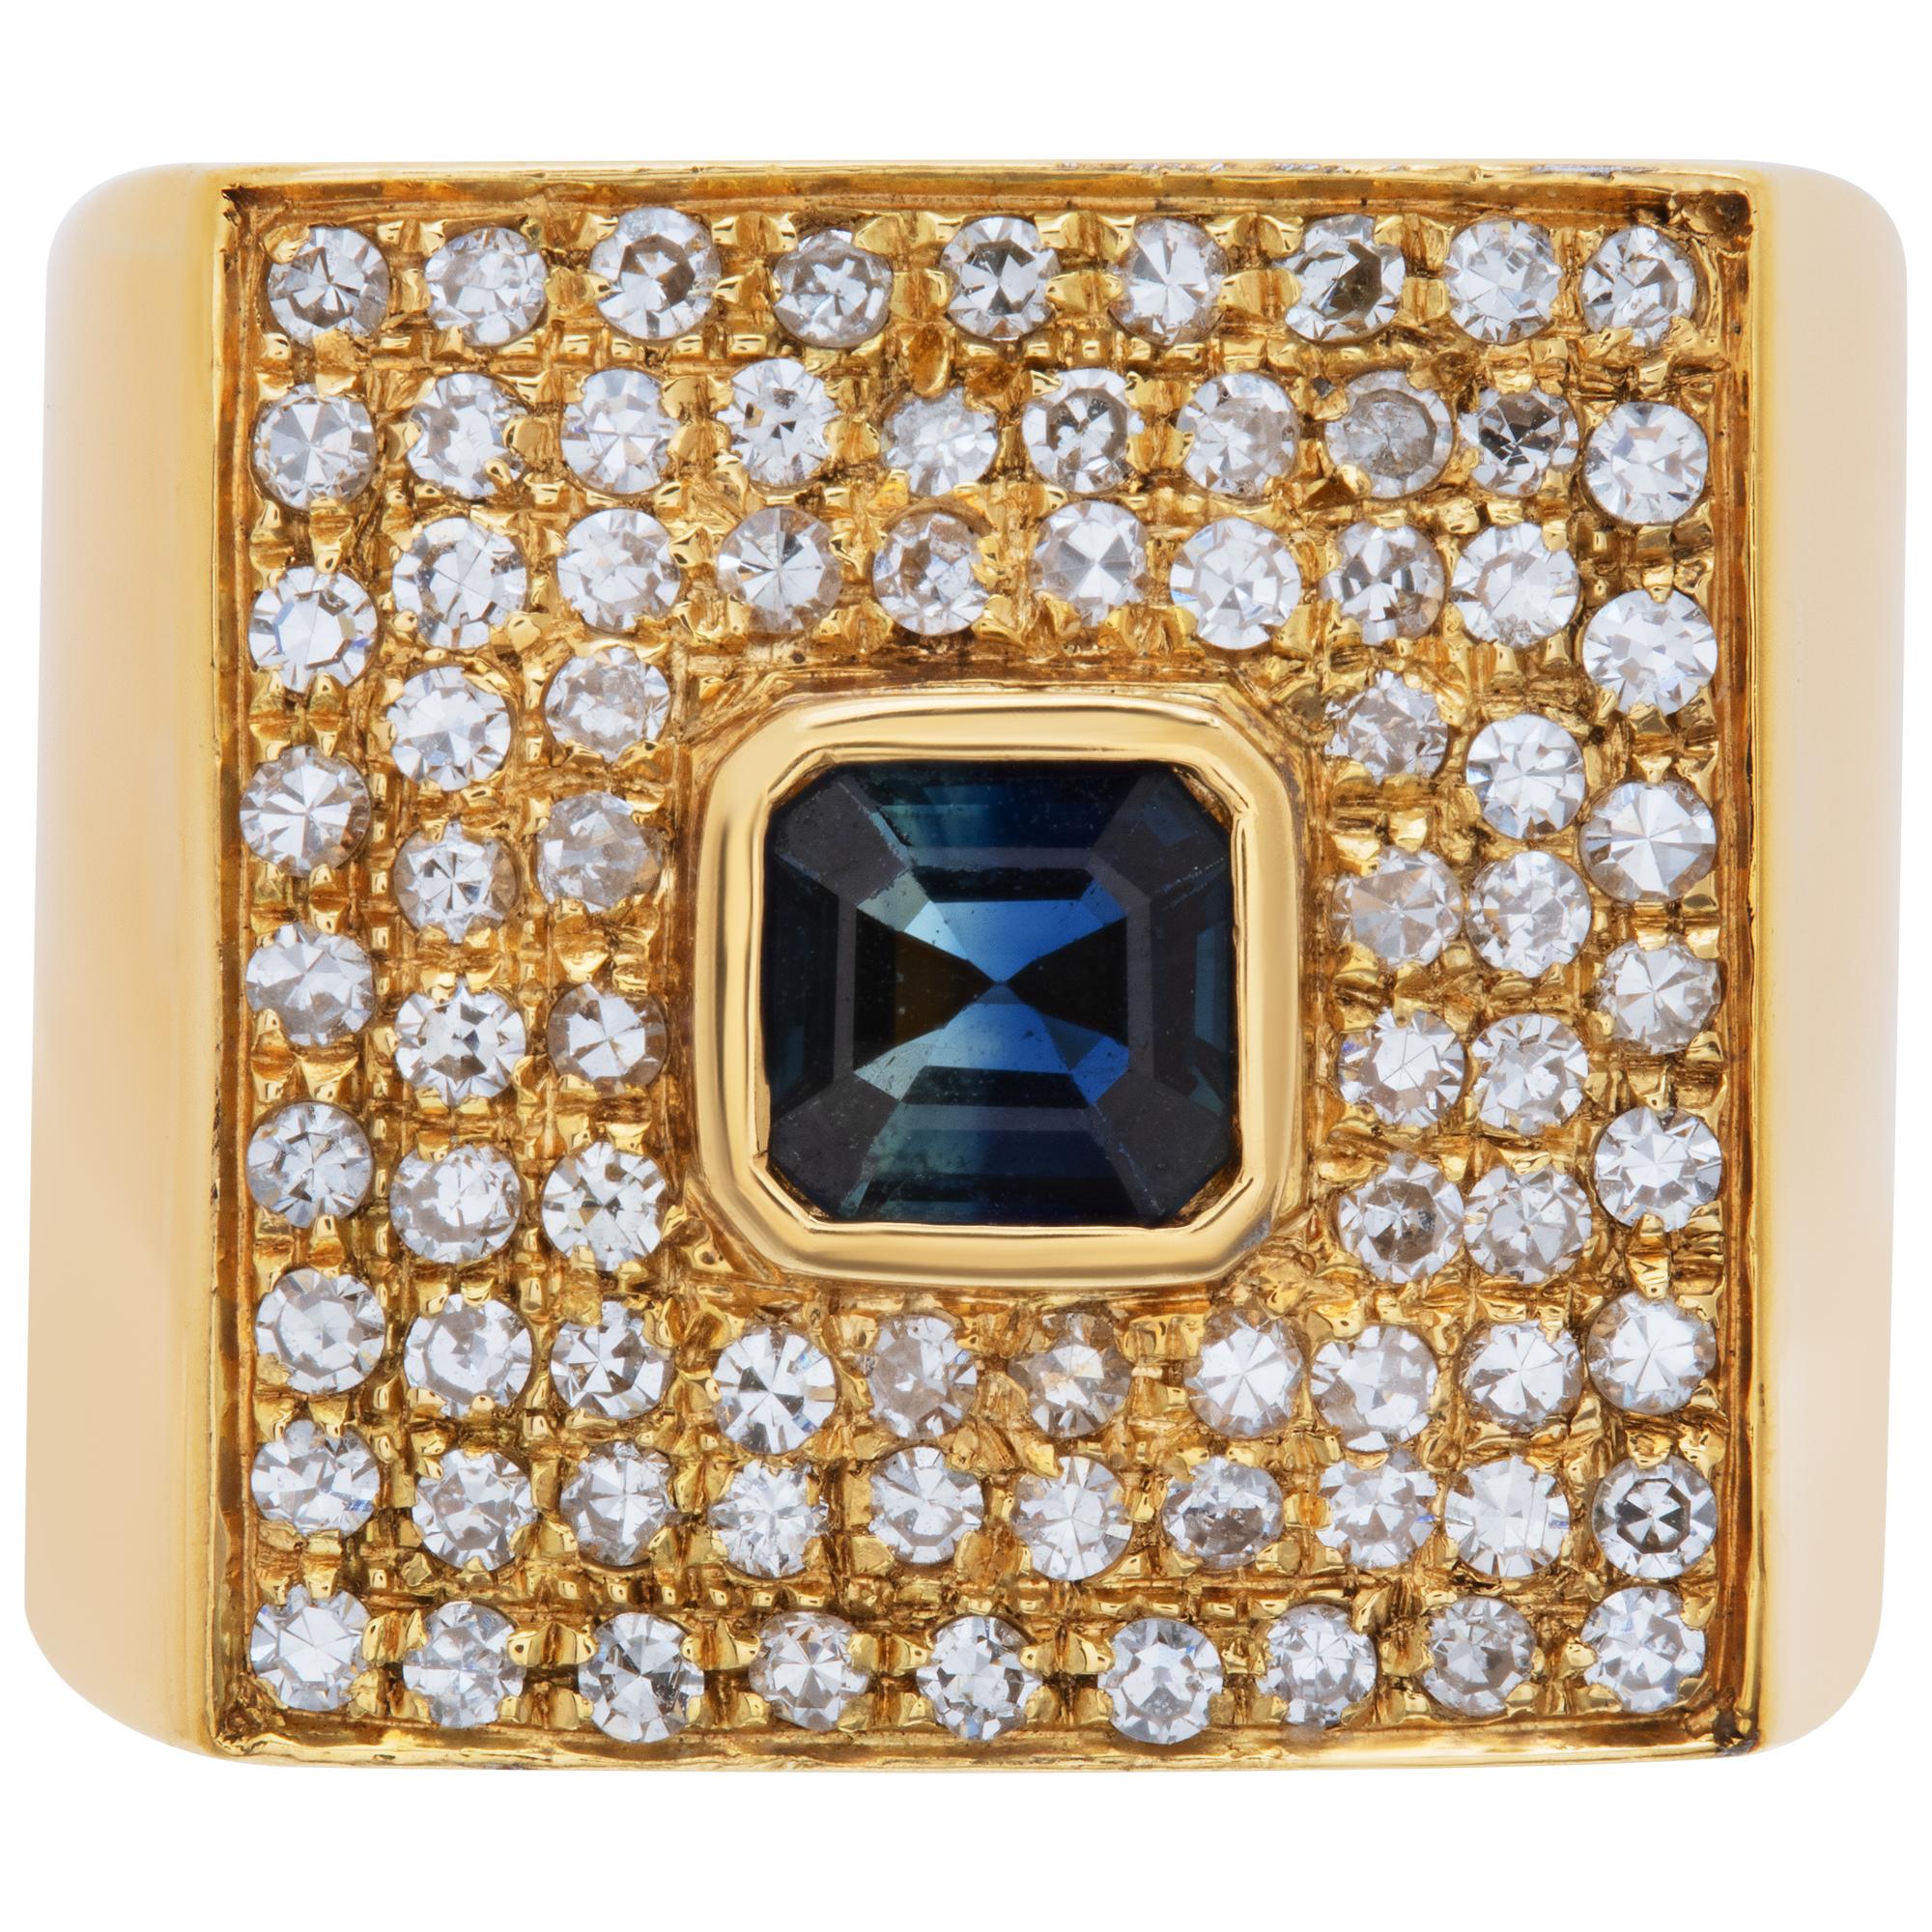 Stepped square emerald cut saphhire & diamonds ring. in 18K yellow gold. Round brilliant diamonds total approx. weight: 1.0 carat, estimate H-I color, VS-SI clarity. Center sapphire approx. weight: 1.0 carat. Square front 15 x15mm. Size 4.5 This